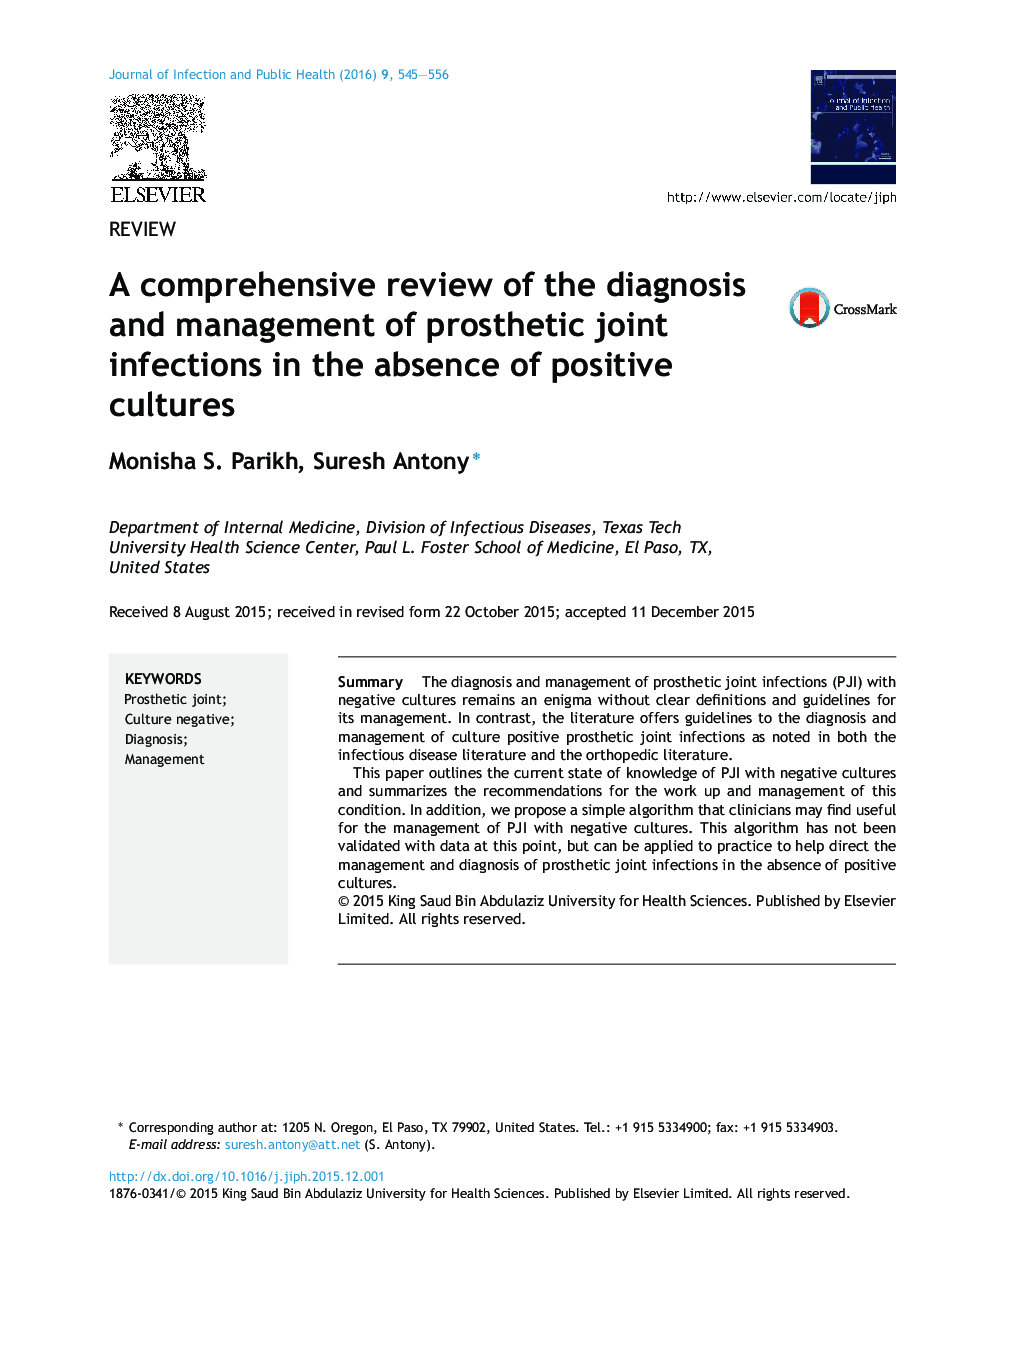 A comprehensive review of the diagnosis and management of prosthetic joint infections in the absence of positive cultures